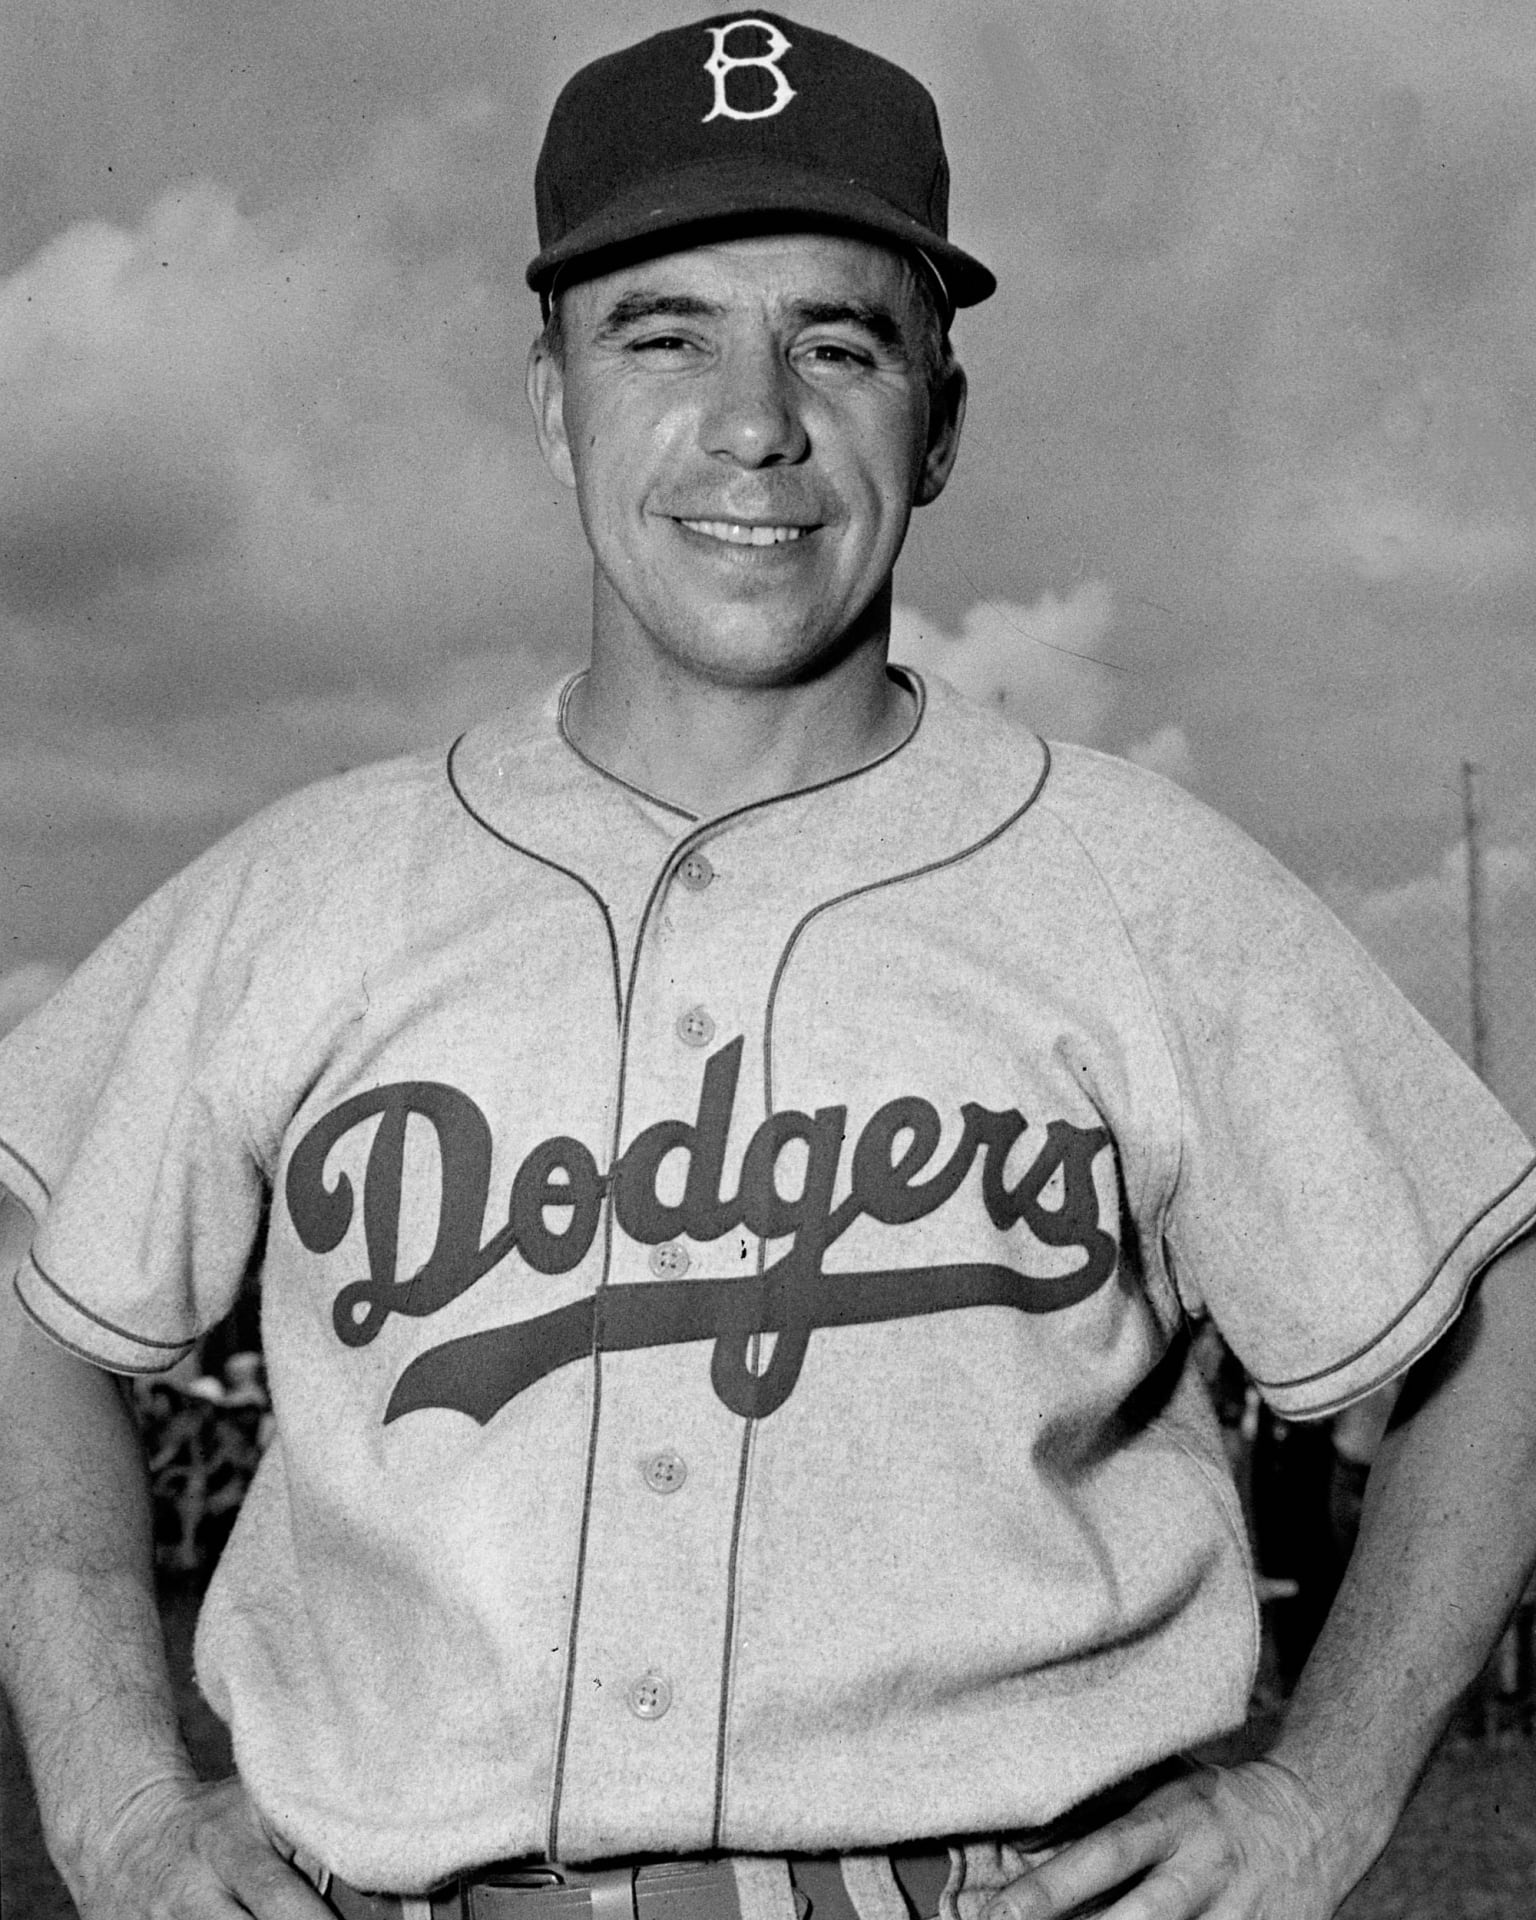 The story behind Dodgers' red uniform numbers & TV broadcasts